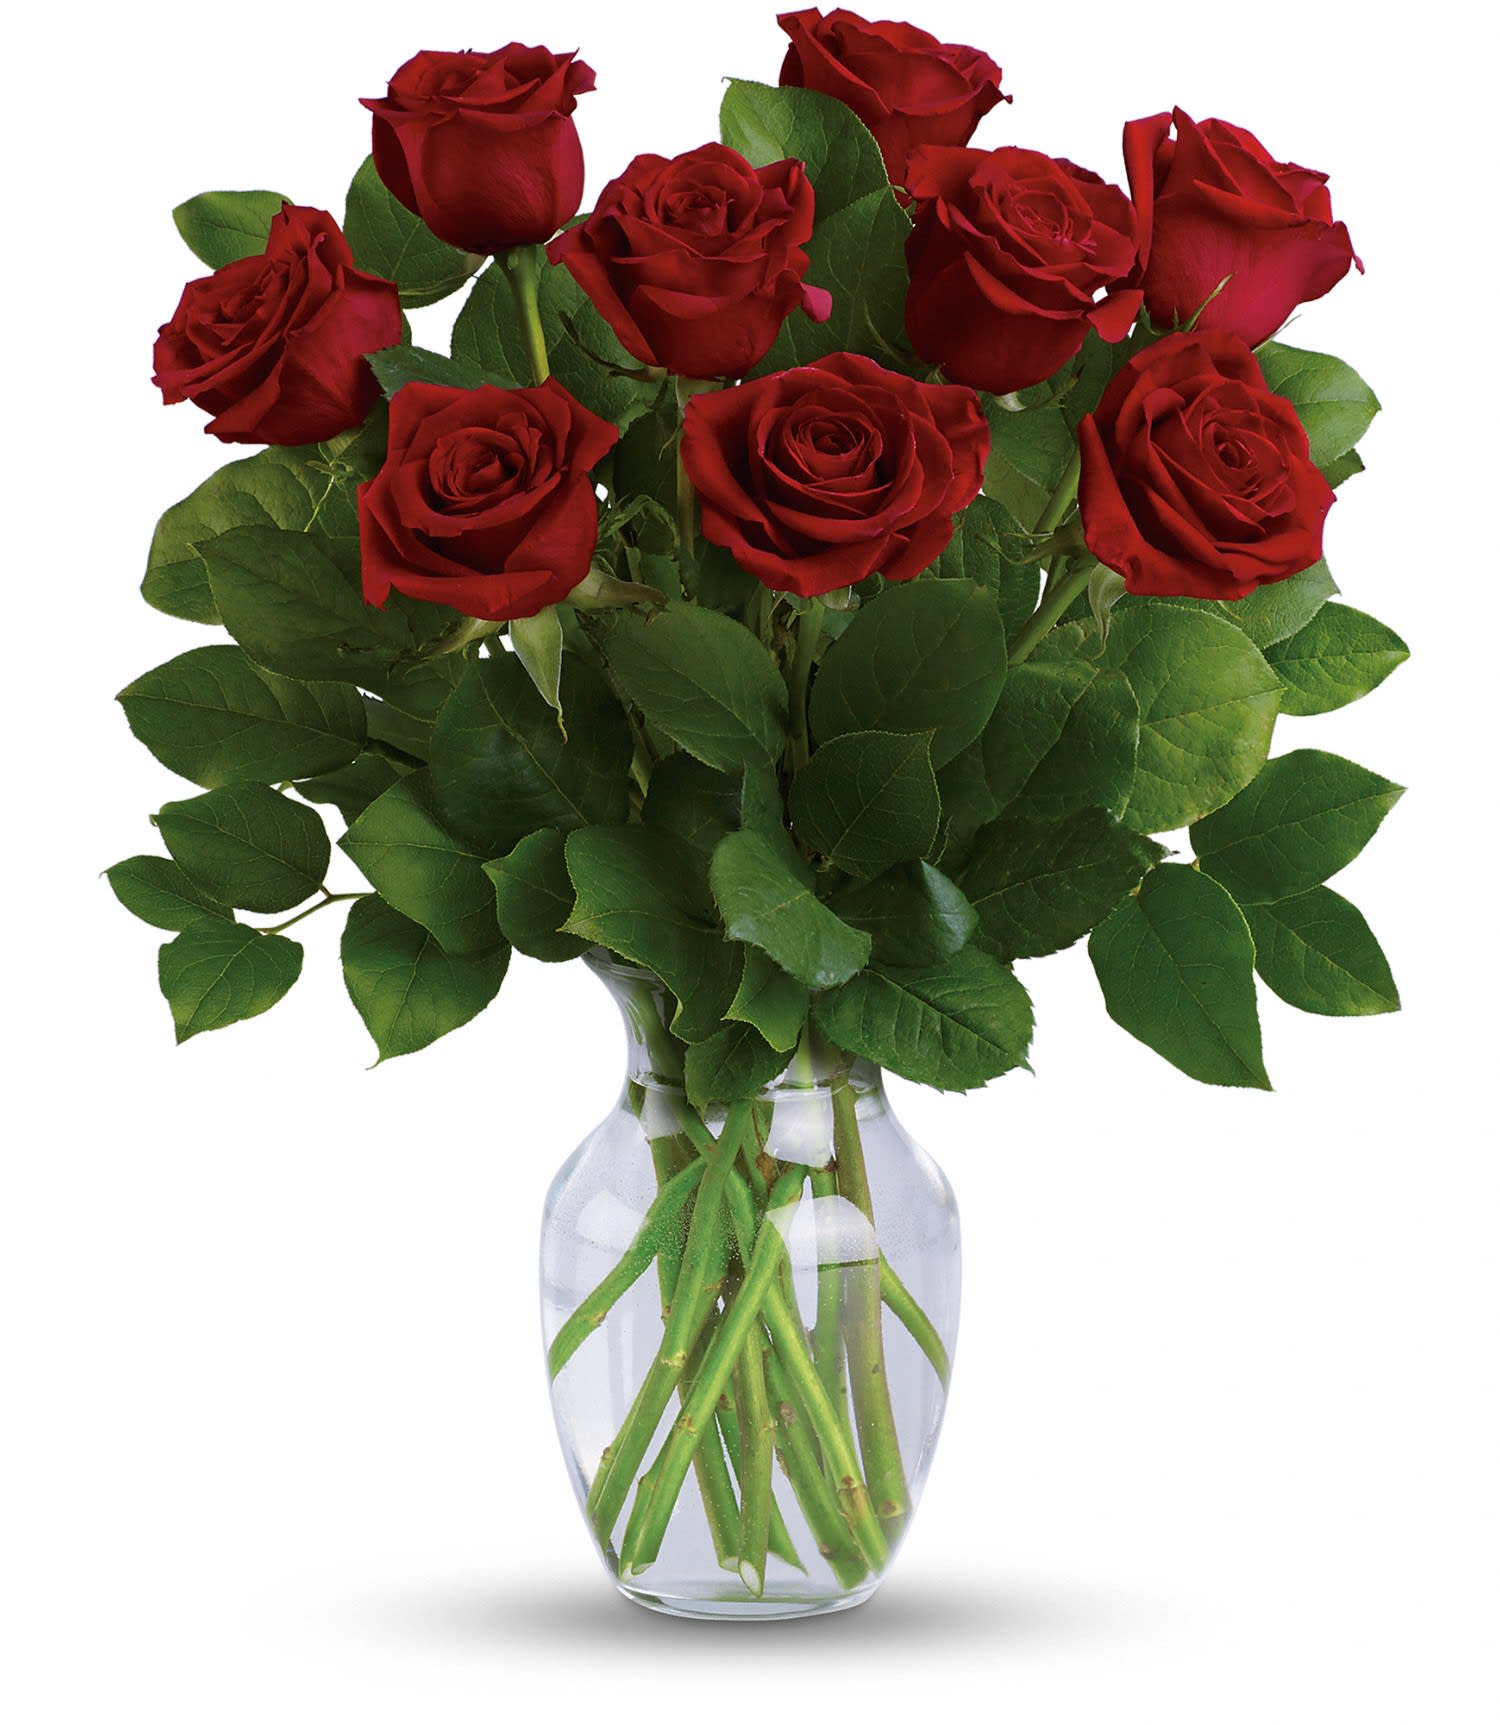 Classic Romance Bouquet - Bring a smile to her lips - and a kiss to yours - with this luxurious bouquet of classic long stemmed roses. It's simply stunning for any romantic occasion in a graceful glass vase with fresh lemon leaf. 